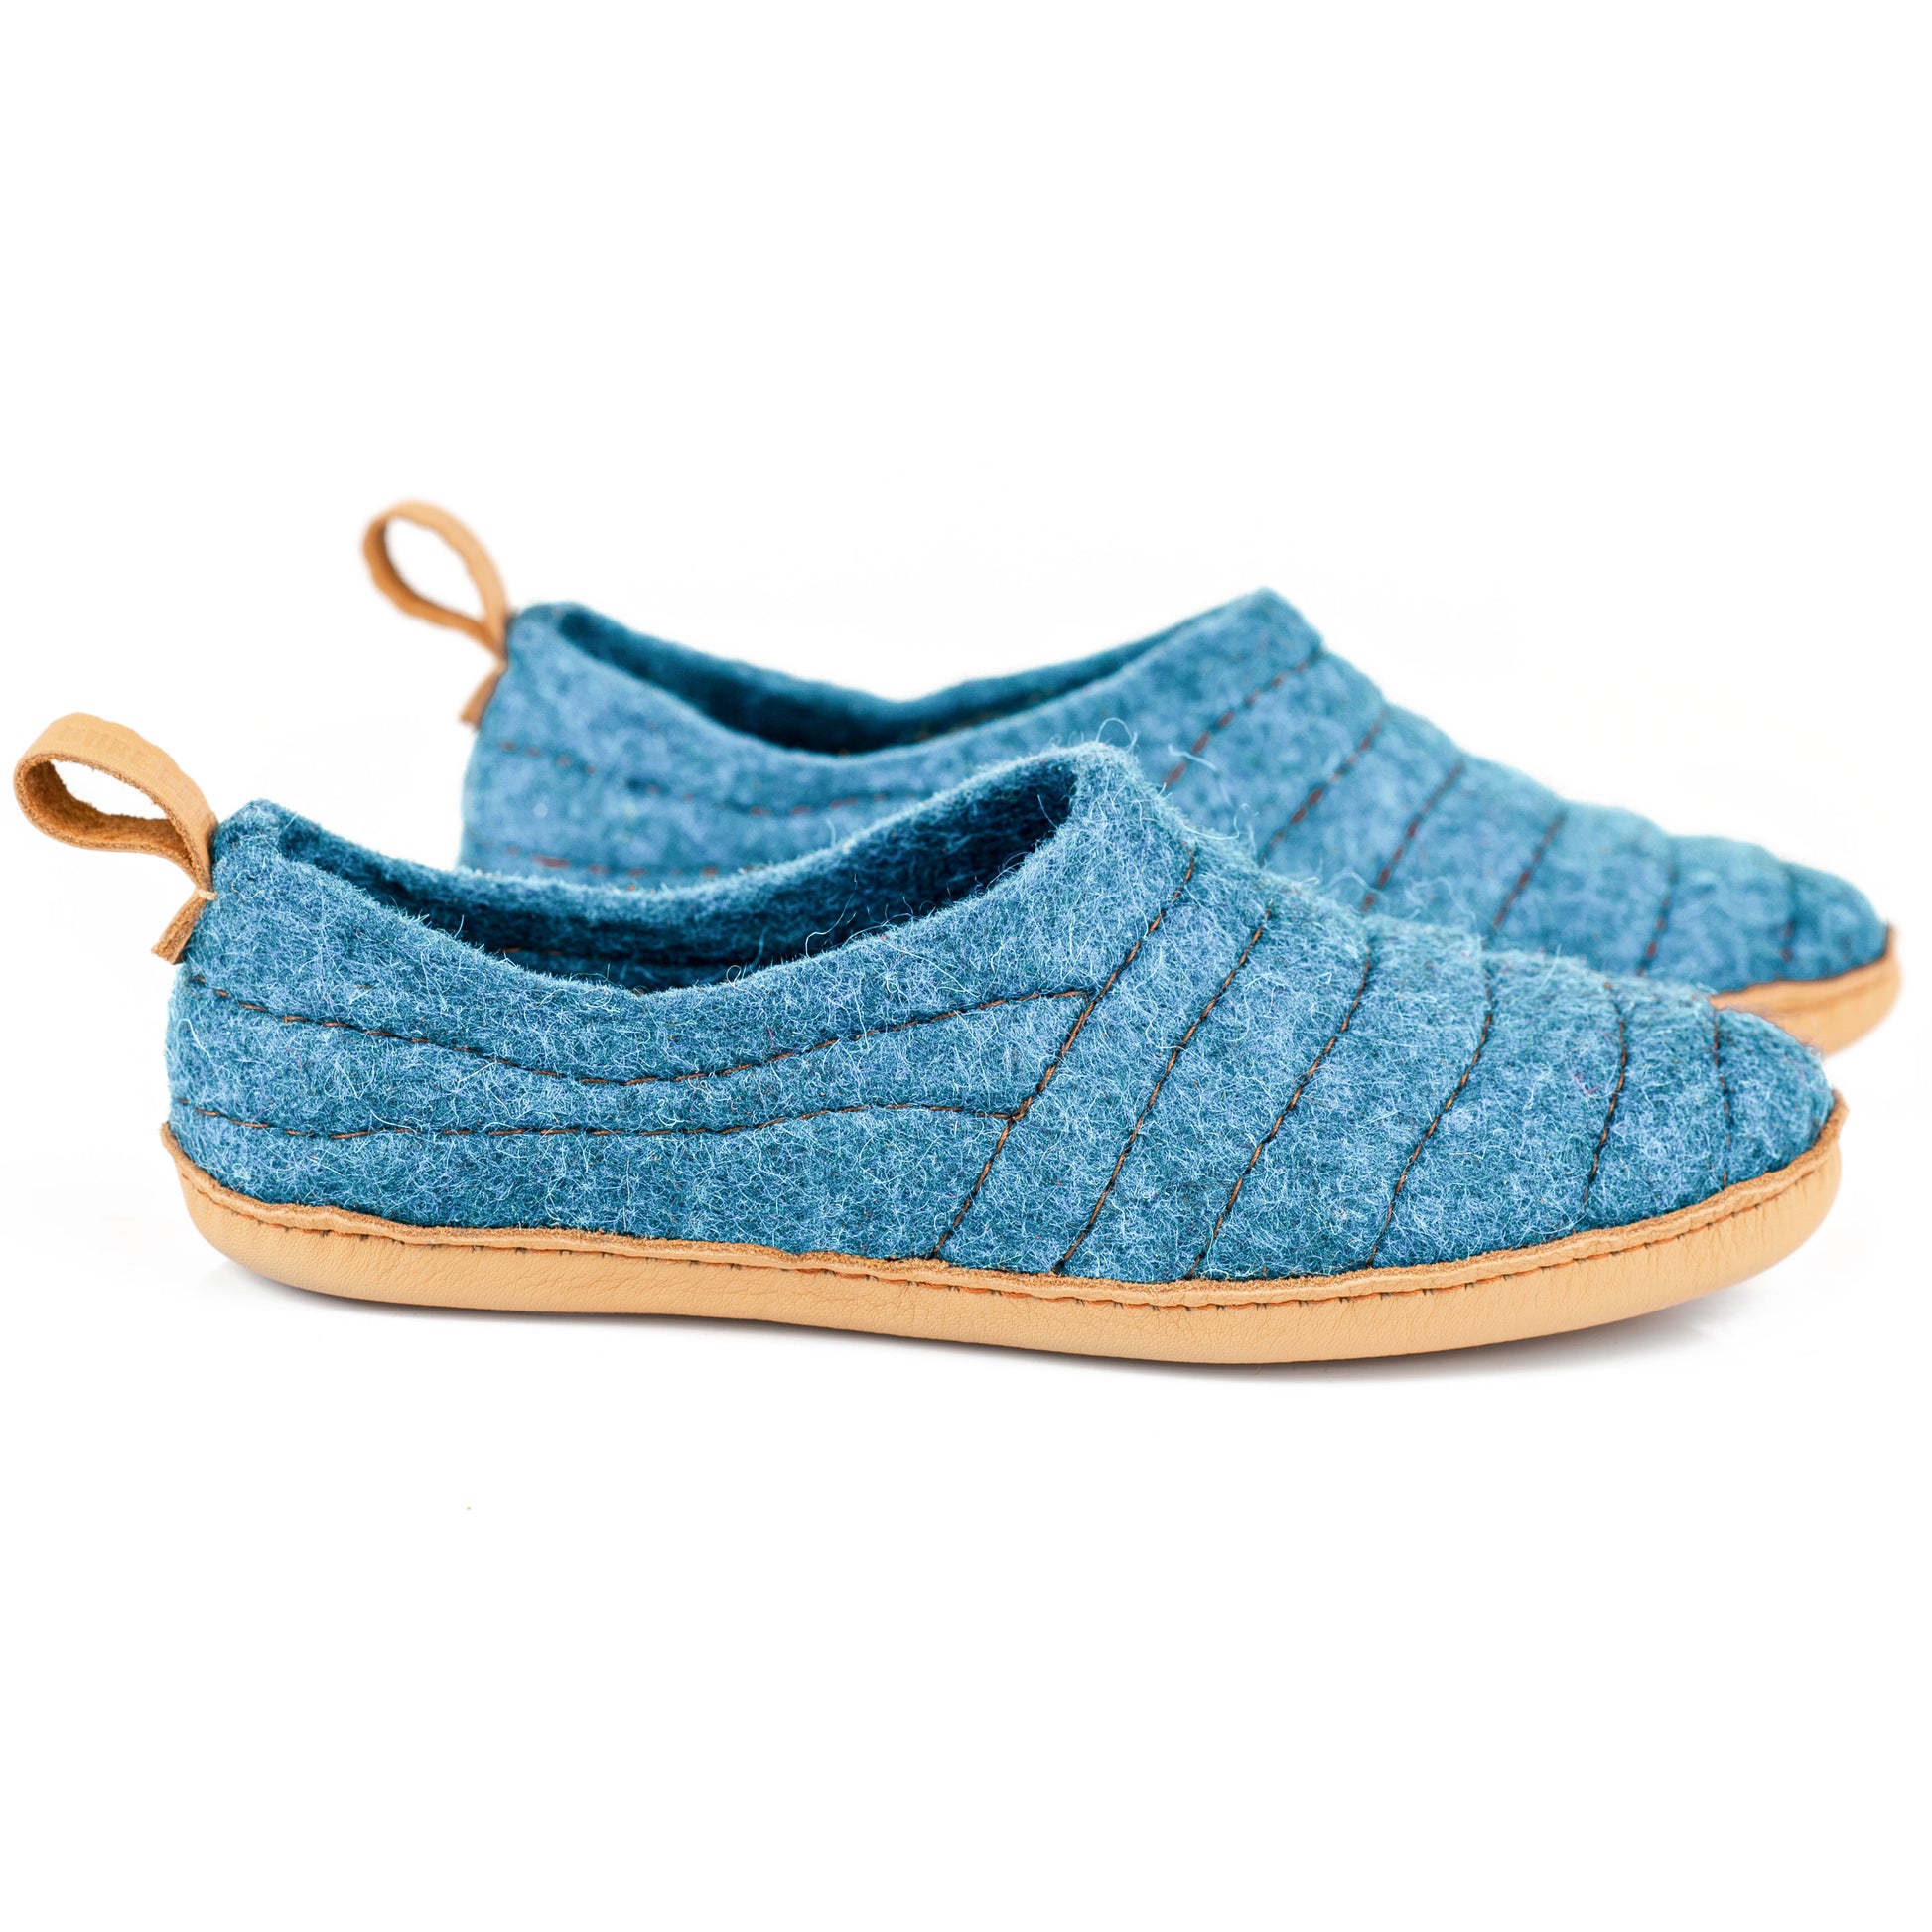 Petrol Light COCOON slippers  for women with recycled leather pull loops by BureBure